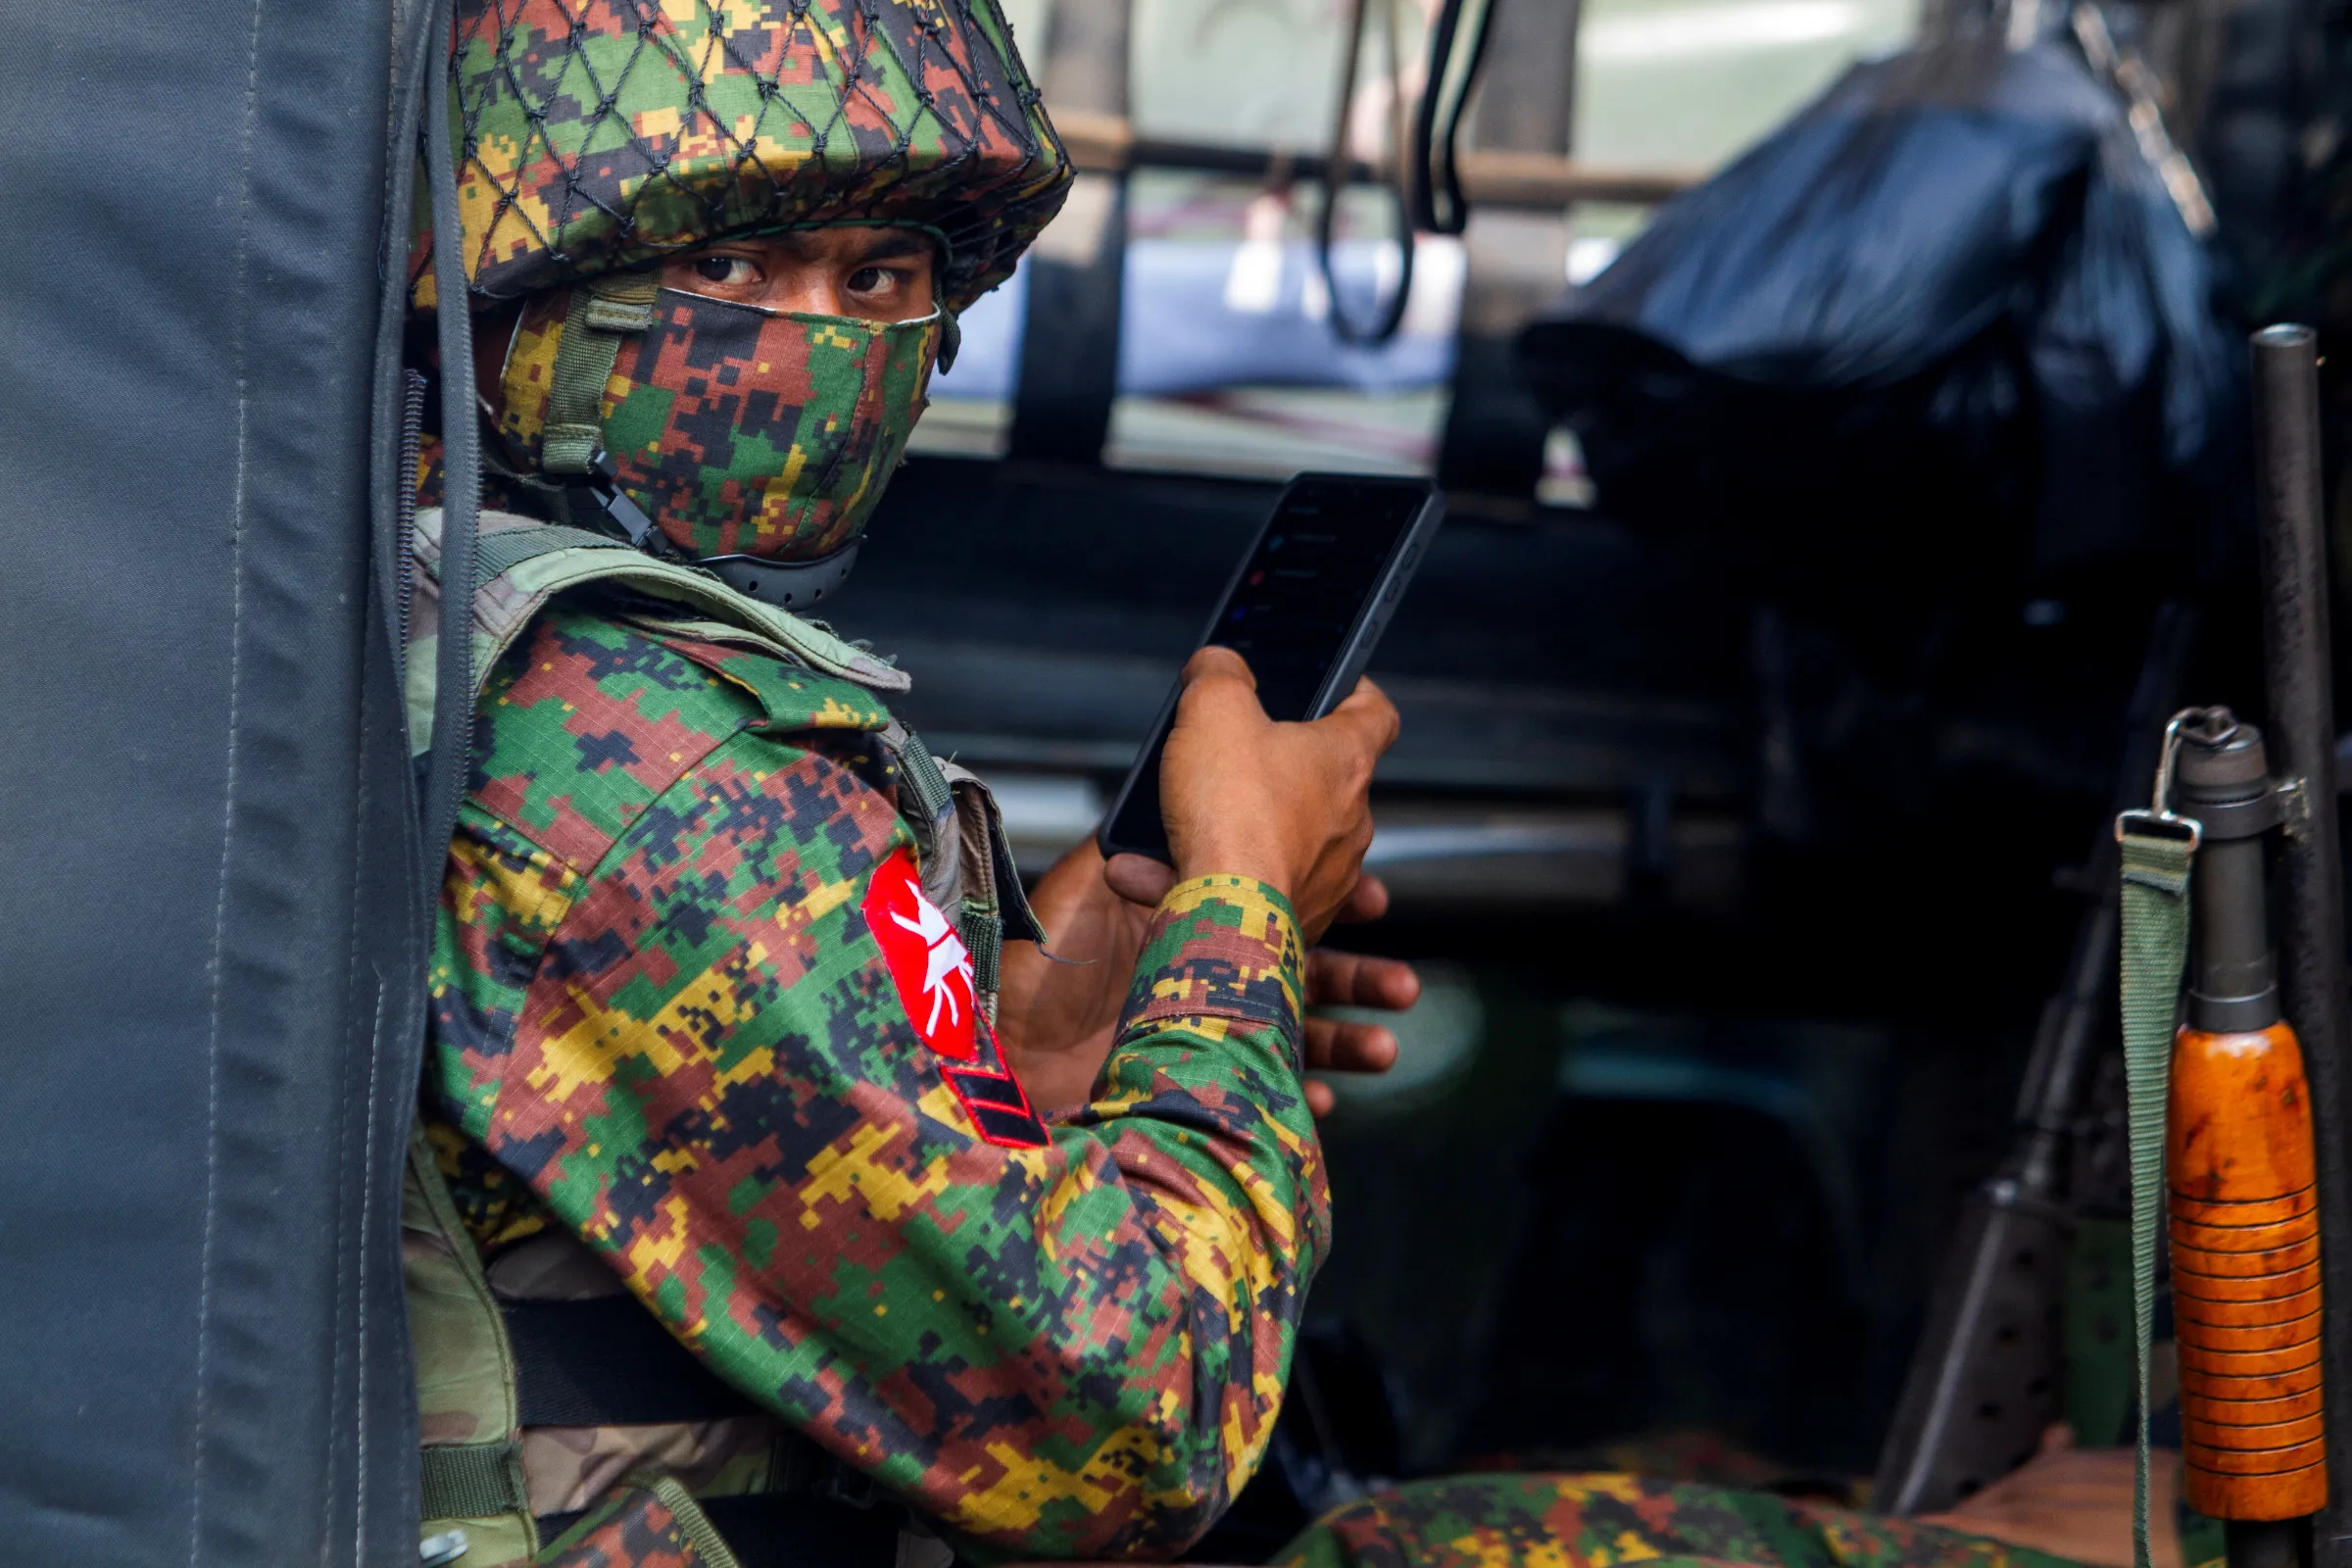 A soldier uses a mobile phone as he sit inside a military vehicle outside Myanmar's Central Bank during a protest against the military coup, in Yangon, Myanmar, February 15, 2021. REUTERS/Stringer